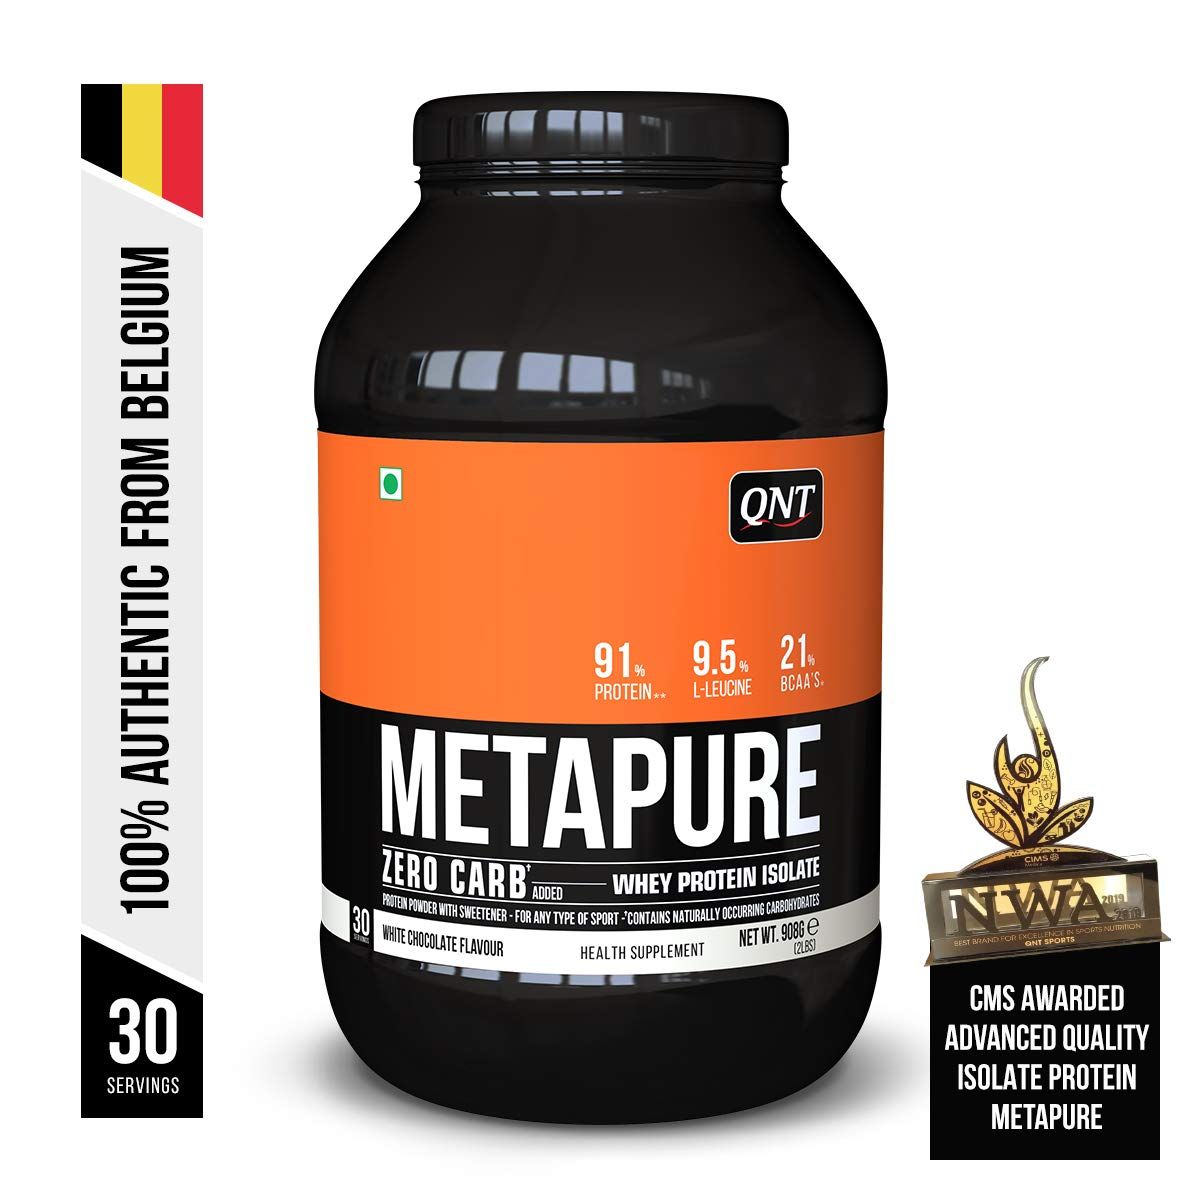 QNT Metapure Zero Carb Whey Isolate White Chocolate Flavour Powder, 908 gm, Pack of 1 